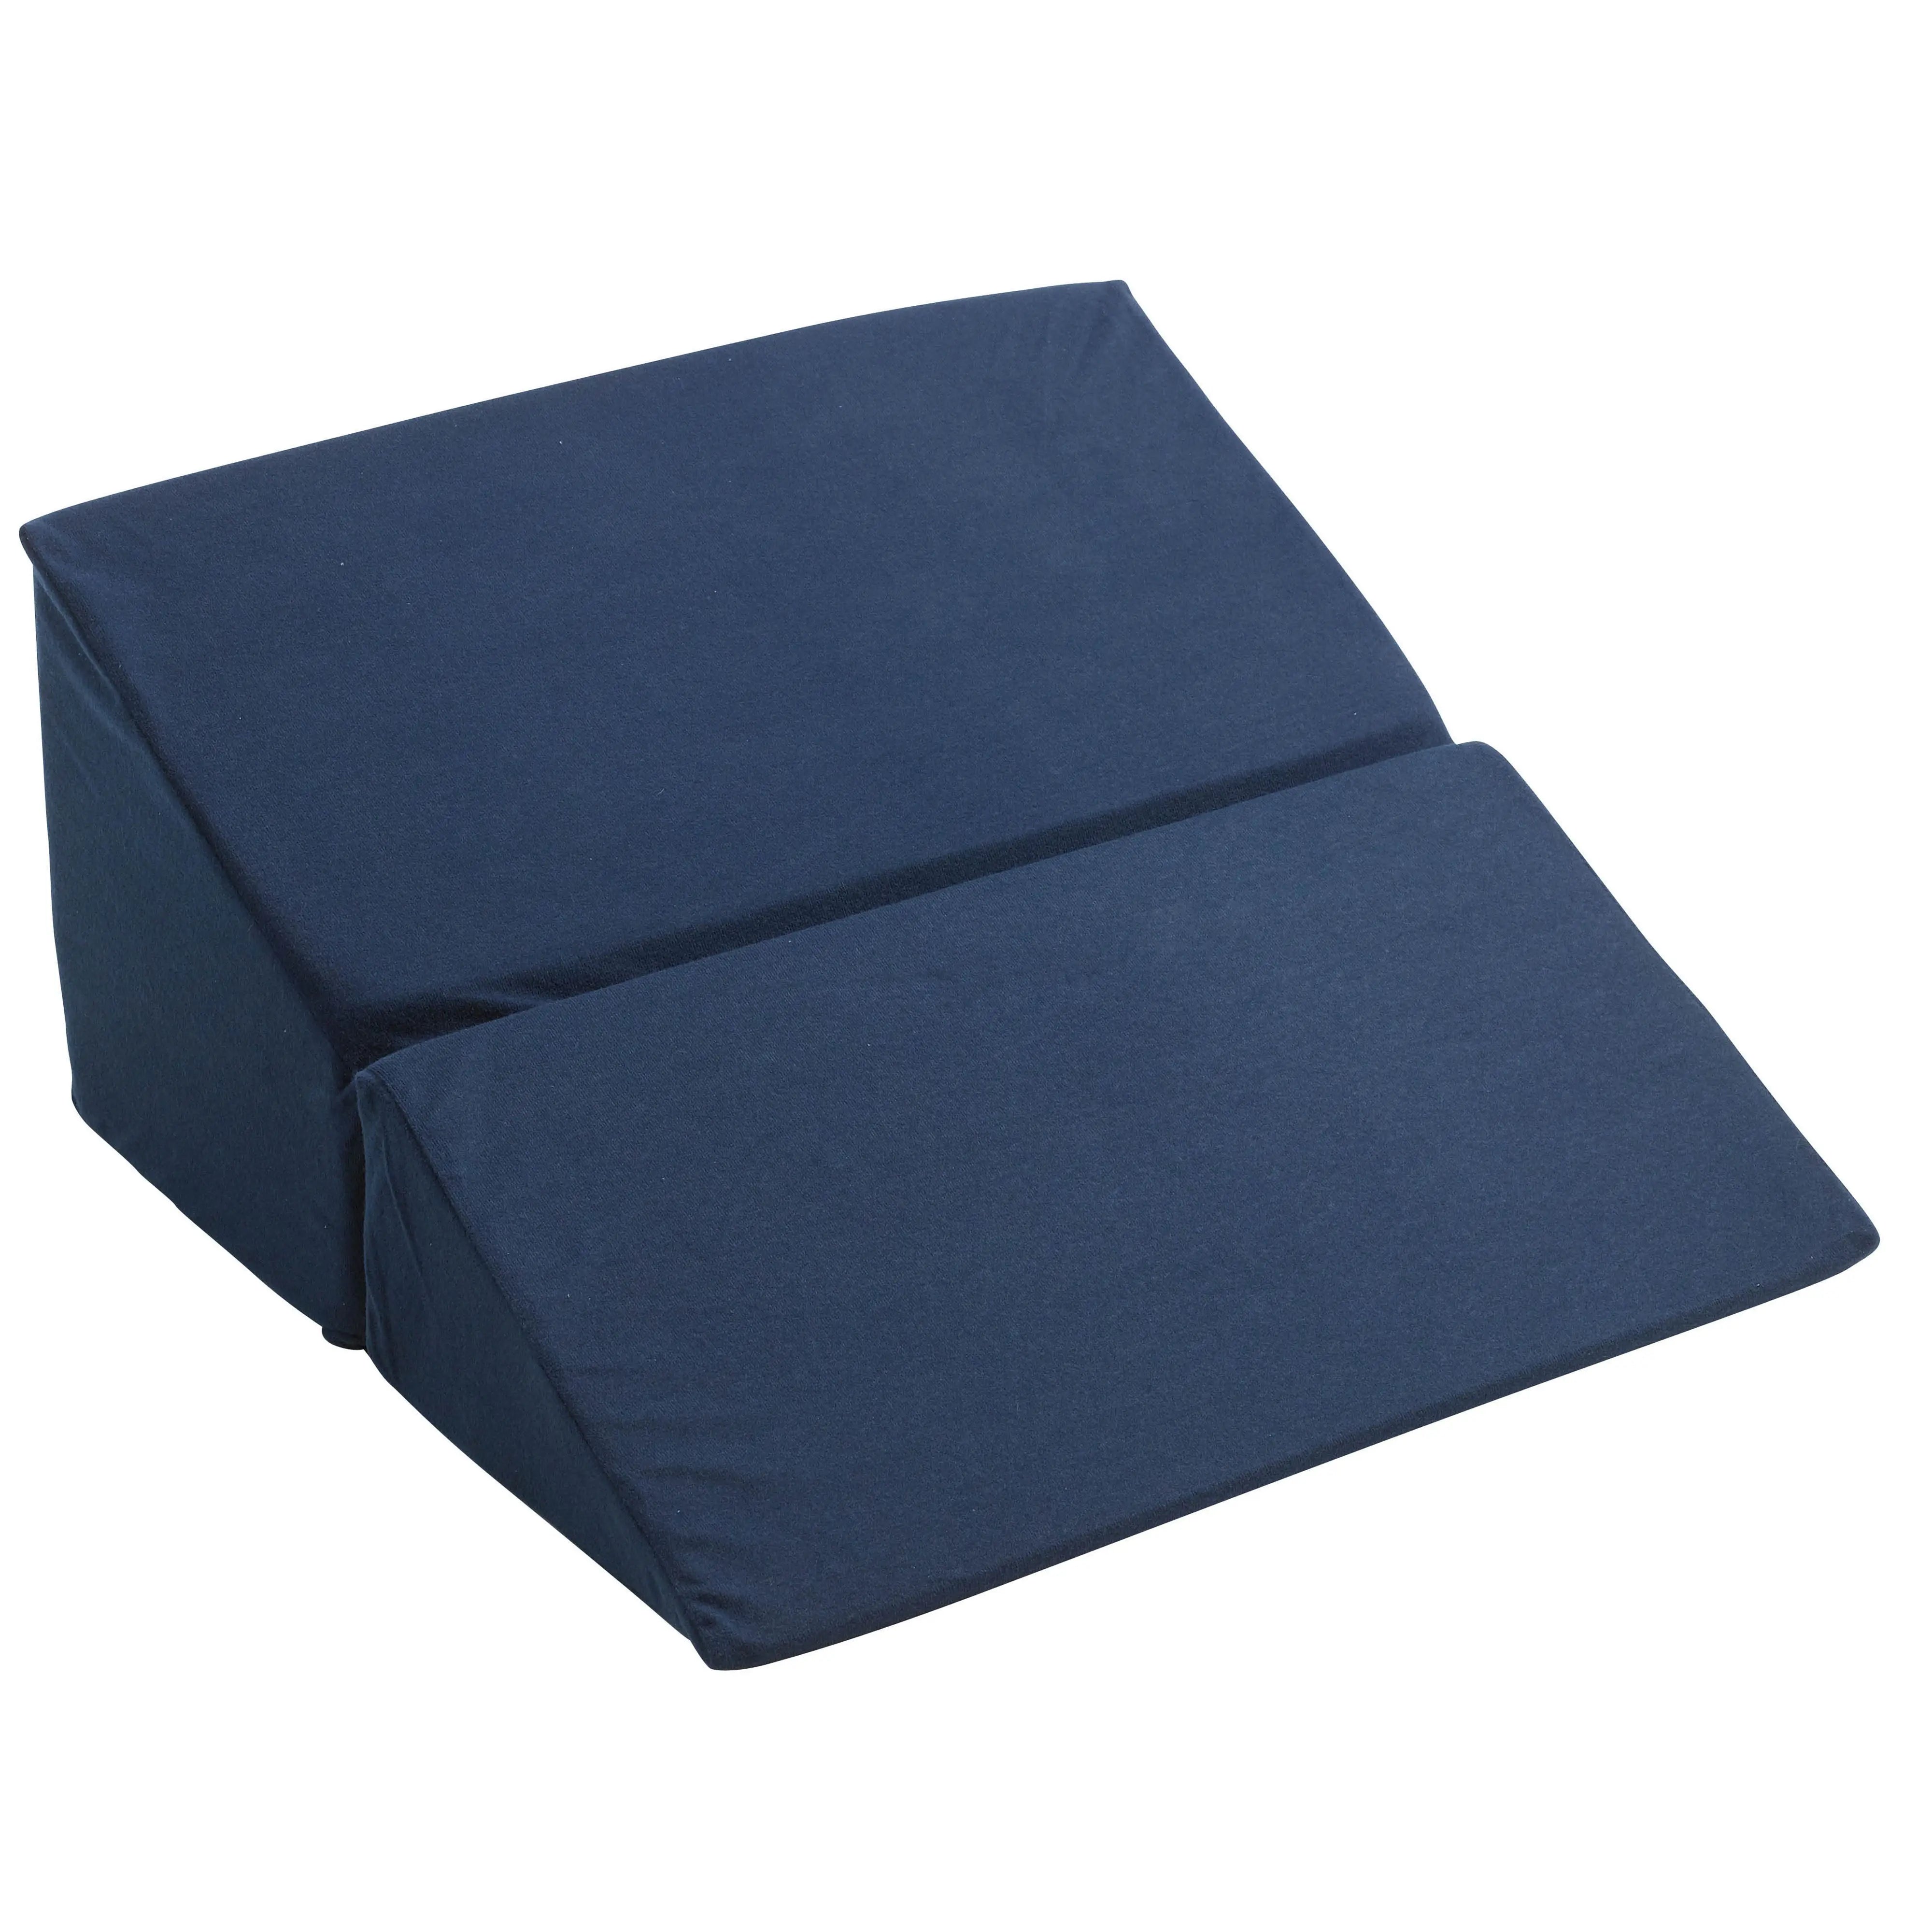 Folding Bed Wedge - Home Health Store Inc